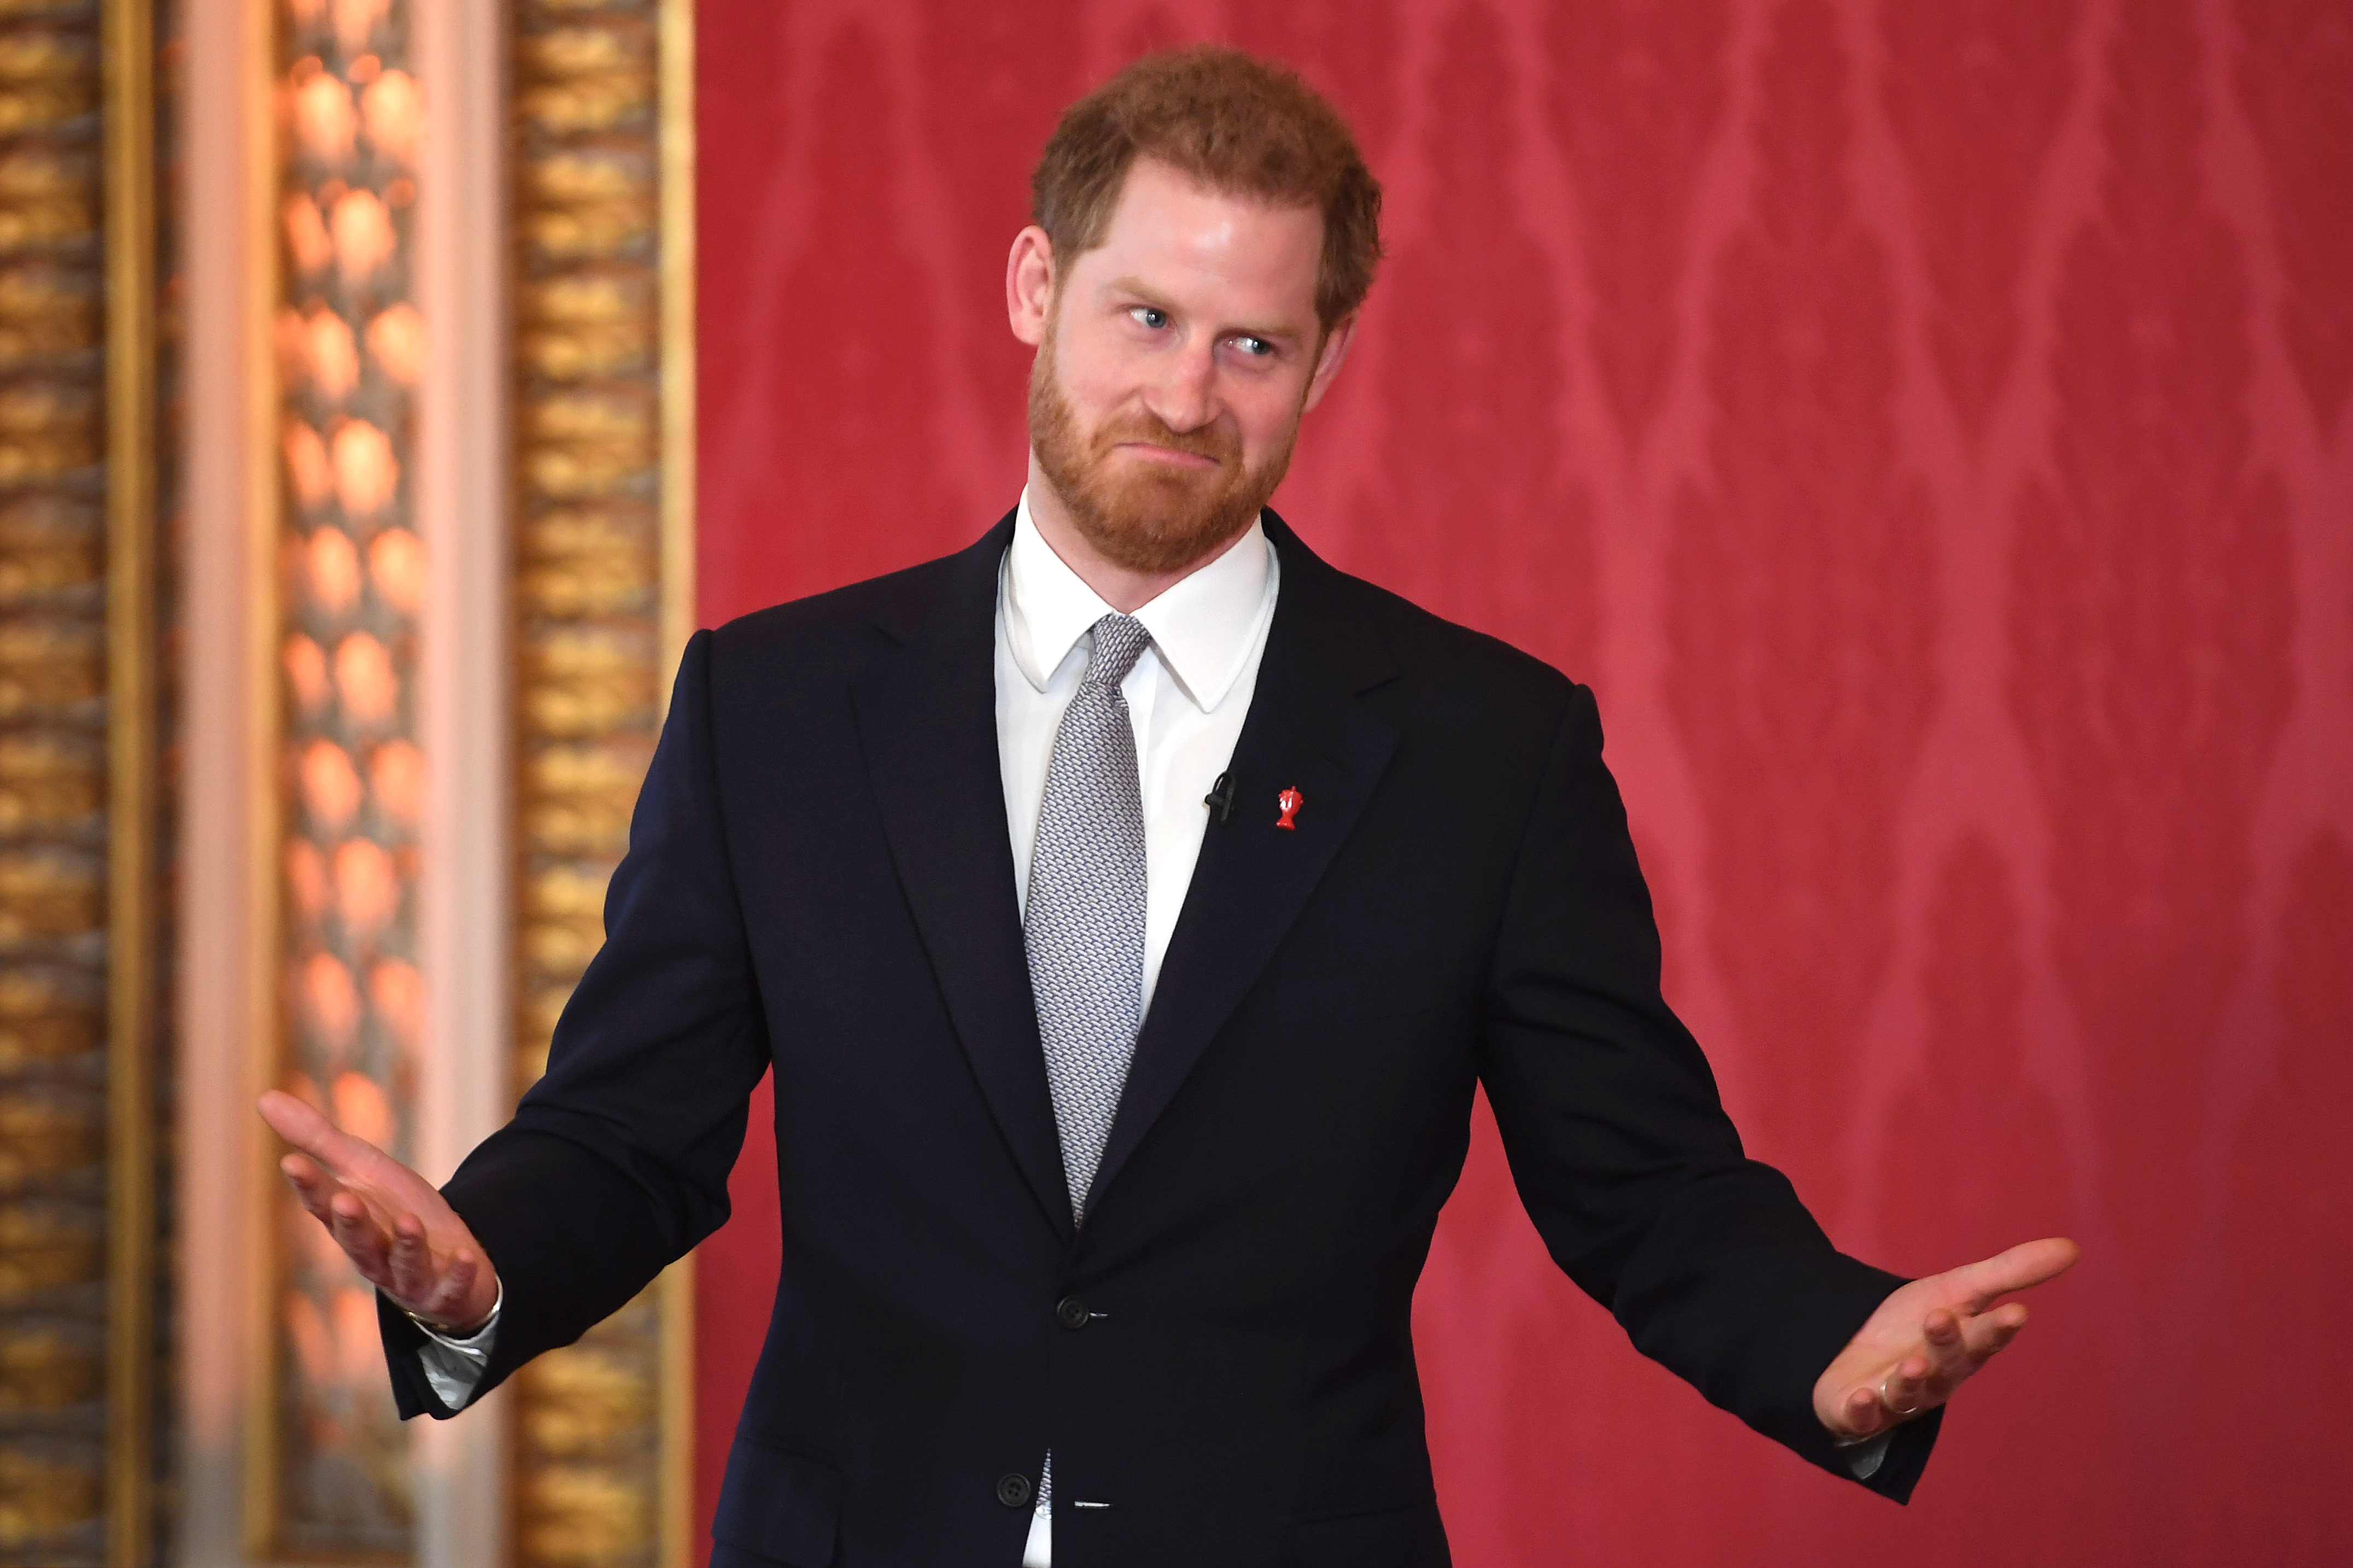 Prince Harry hosts the Rugby League World Cup 2021 draws in London in 2020 | Source: Getty Images